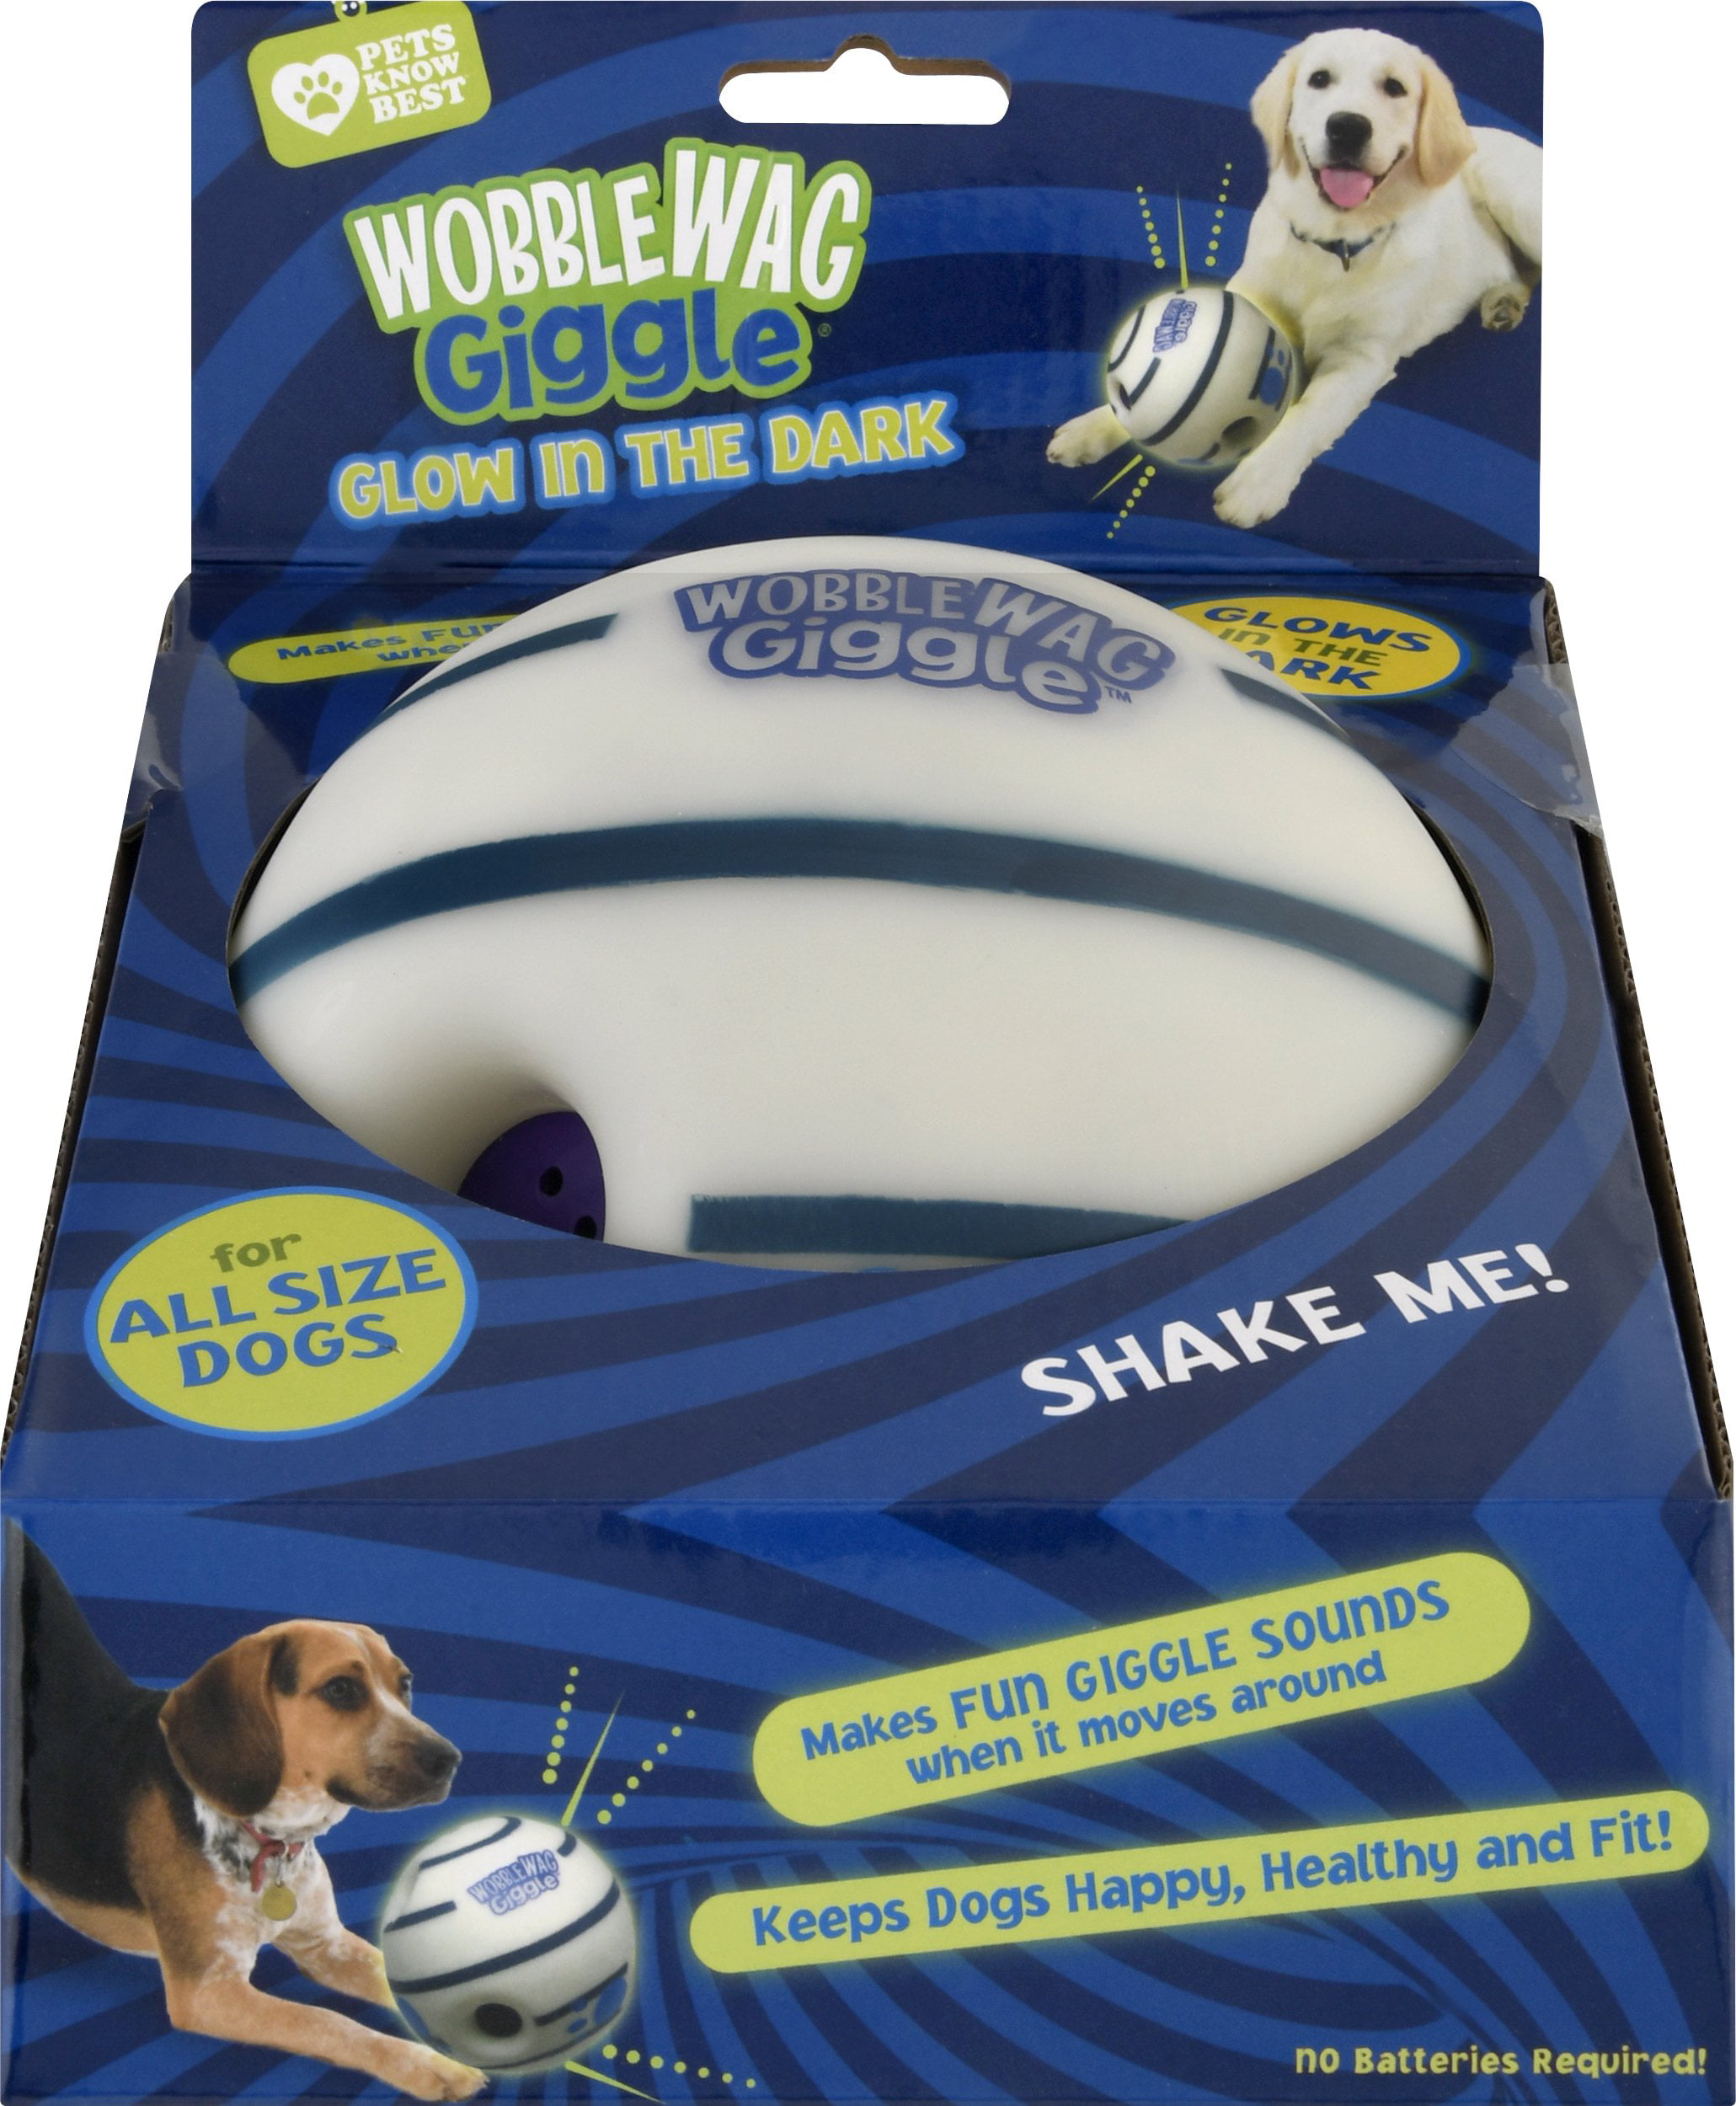 Blind dog toys - Top 10 of 2019 - THESE DOG DAYS